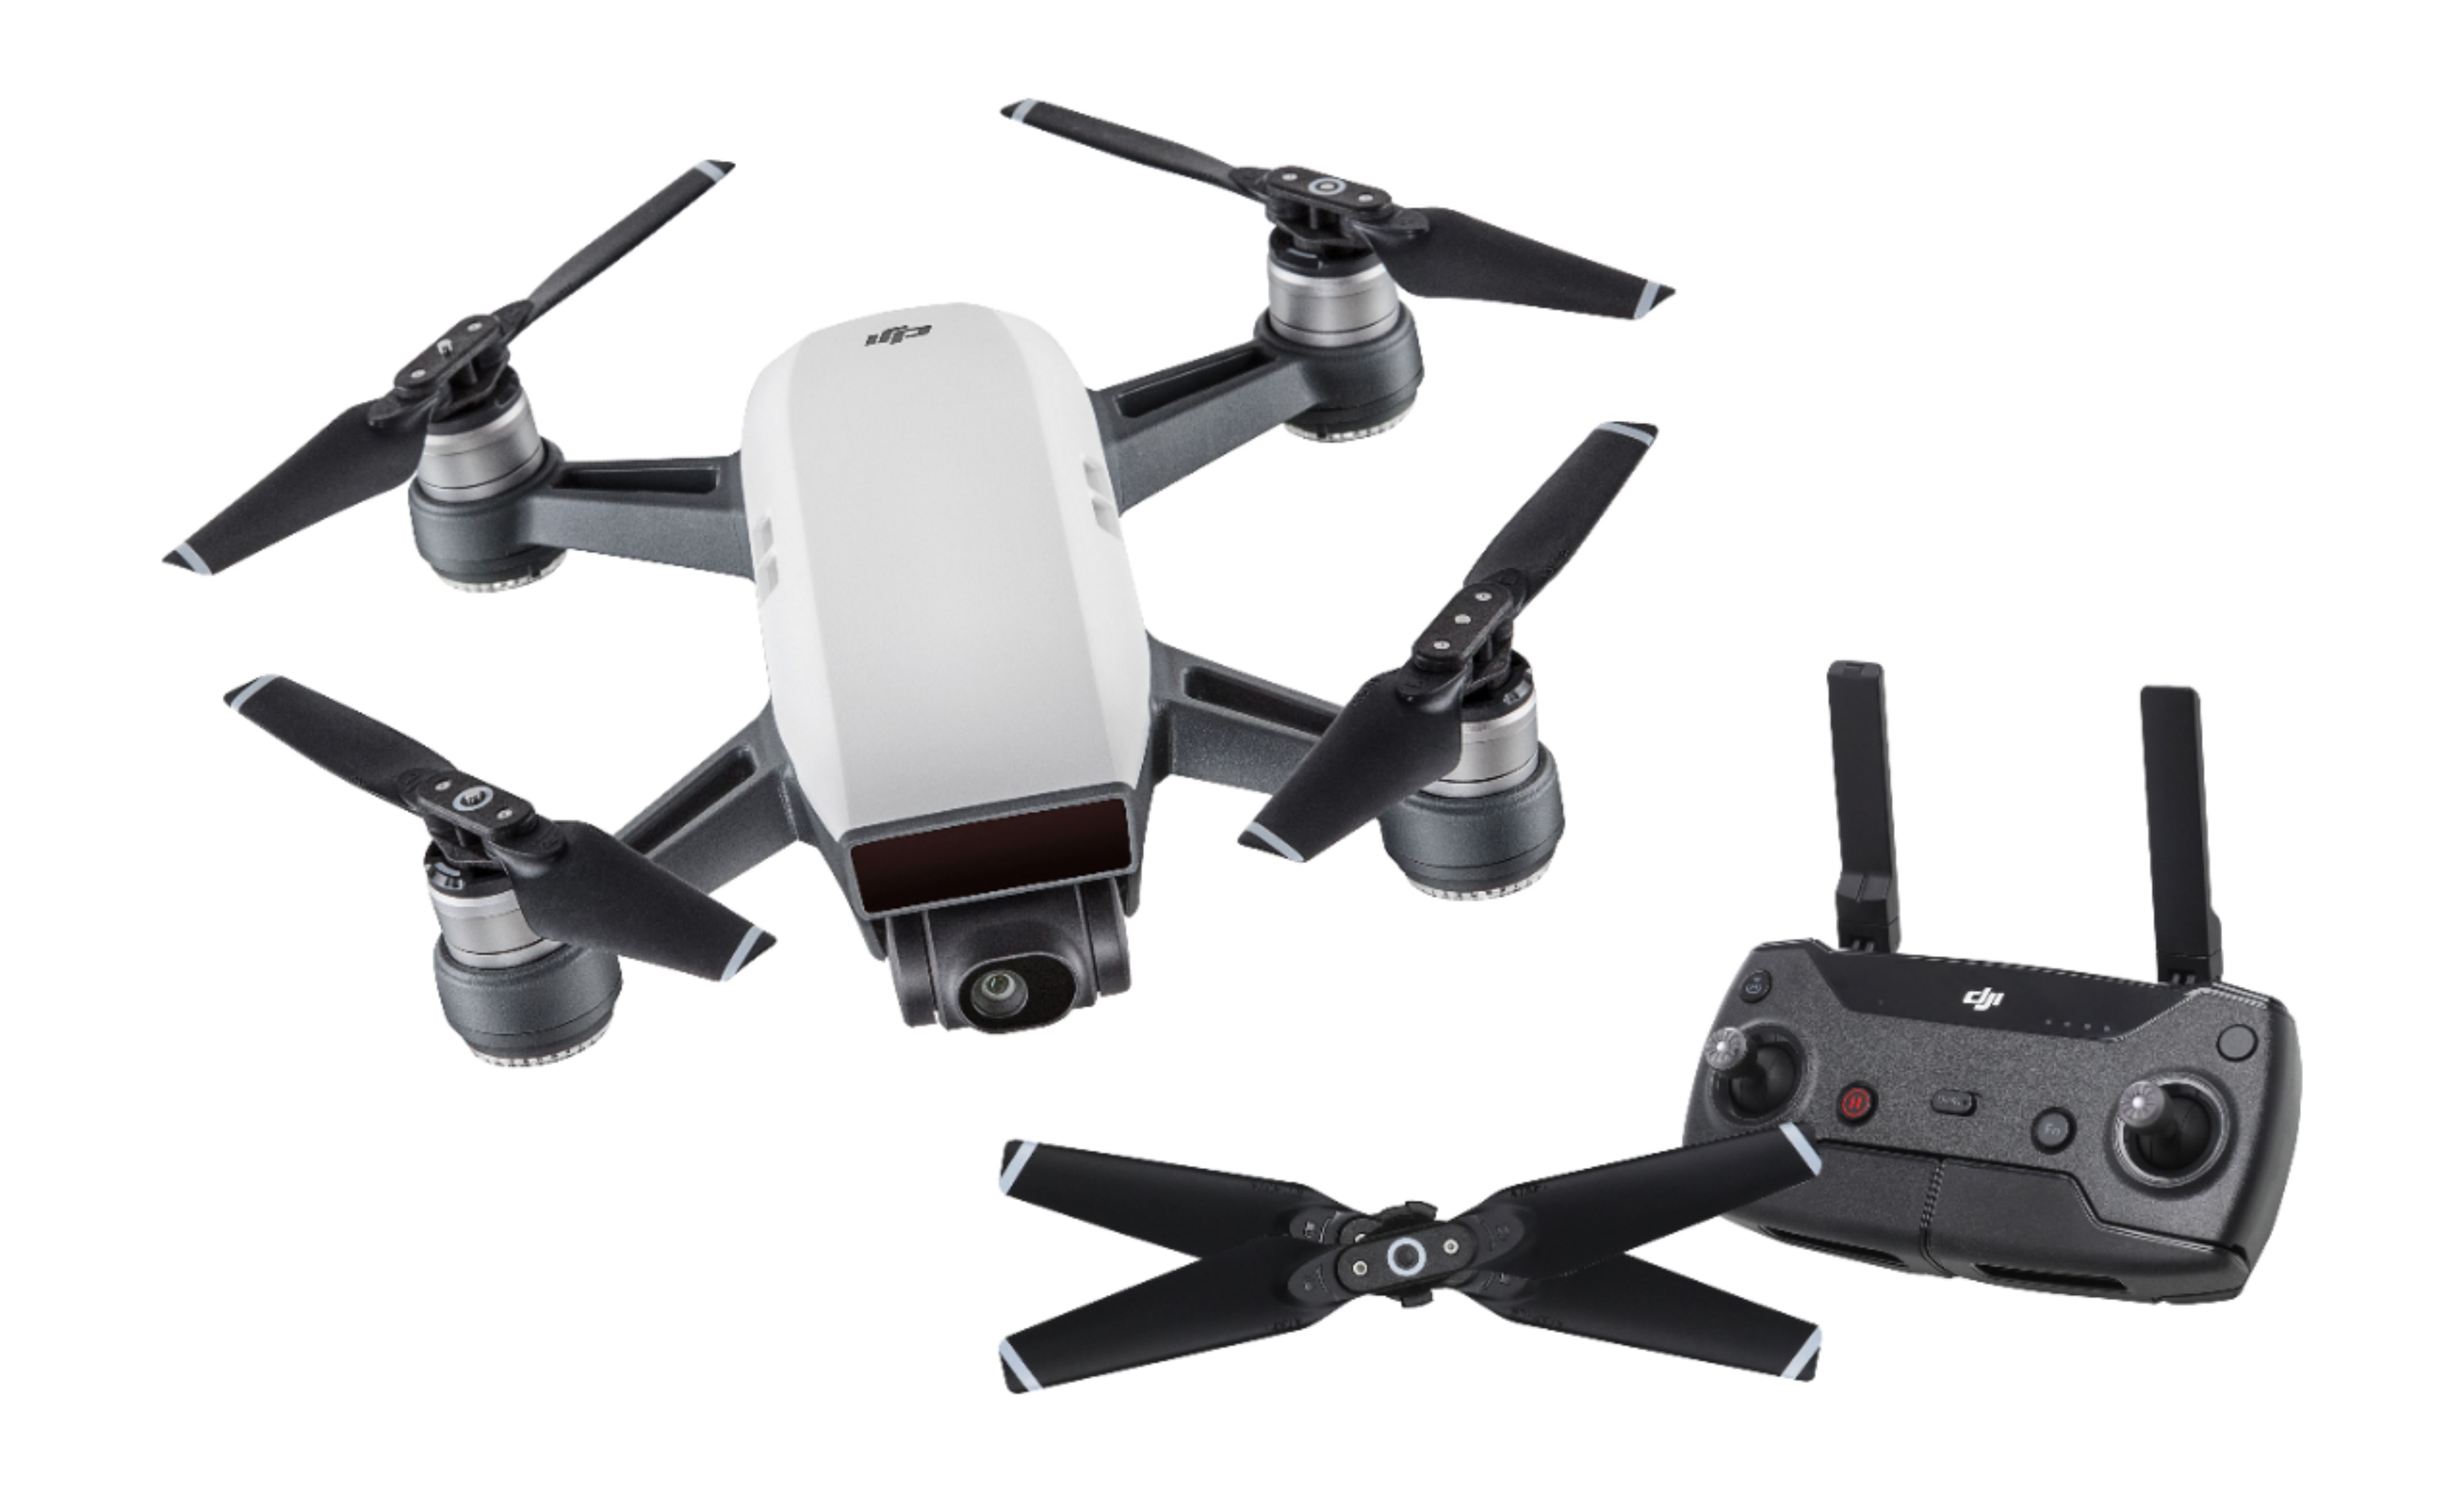 DJI Spark Fly More Quadcopter Alpine White CP.PT.000899 - Best Buy